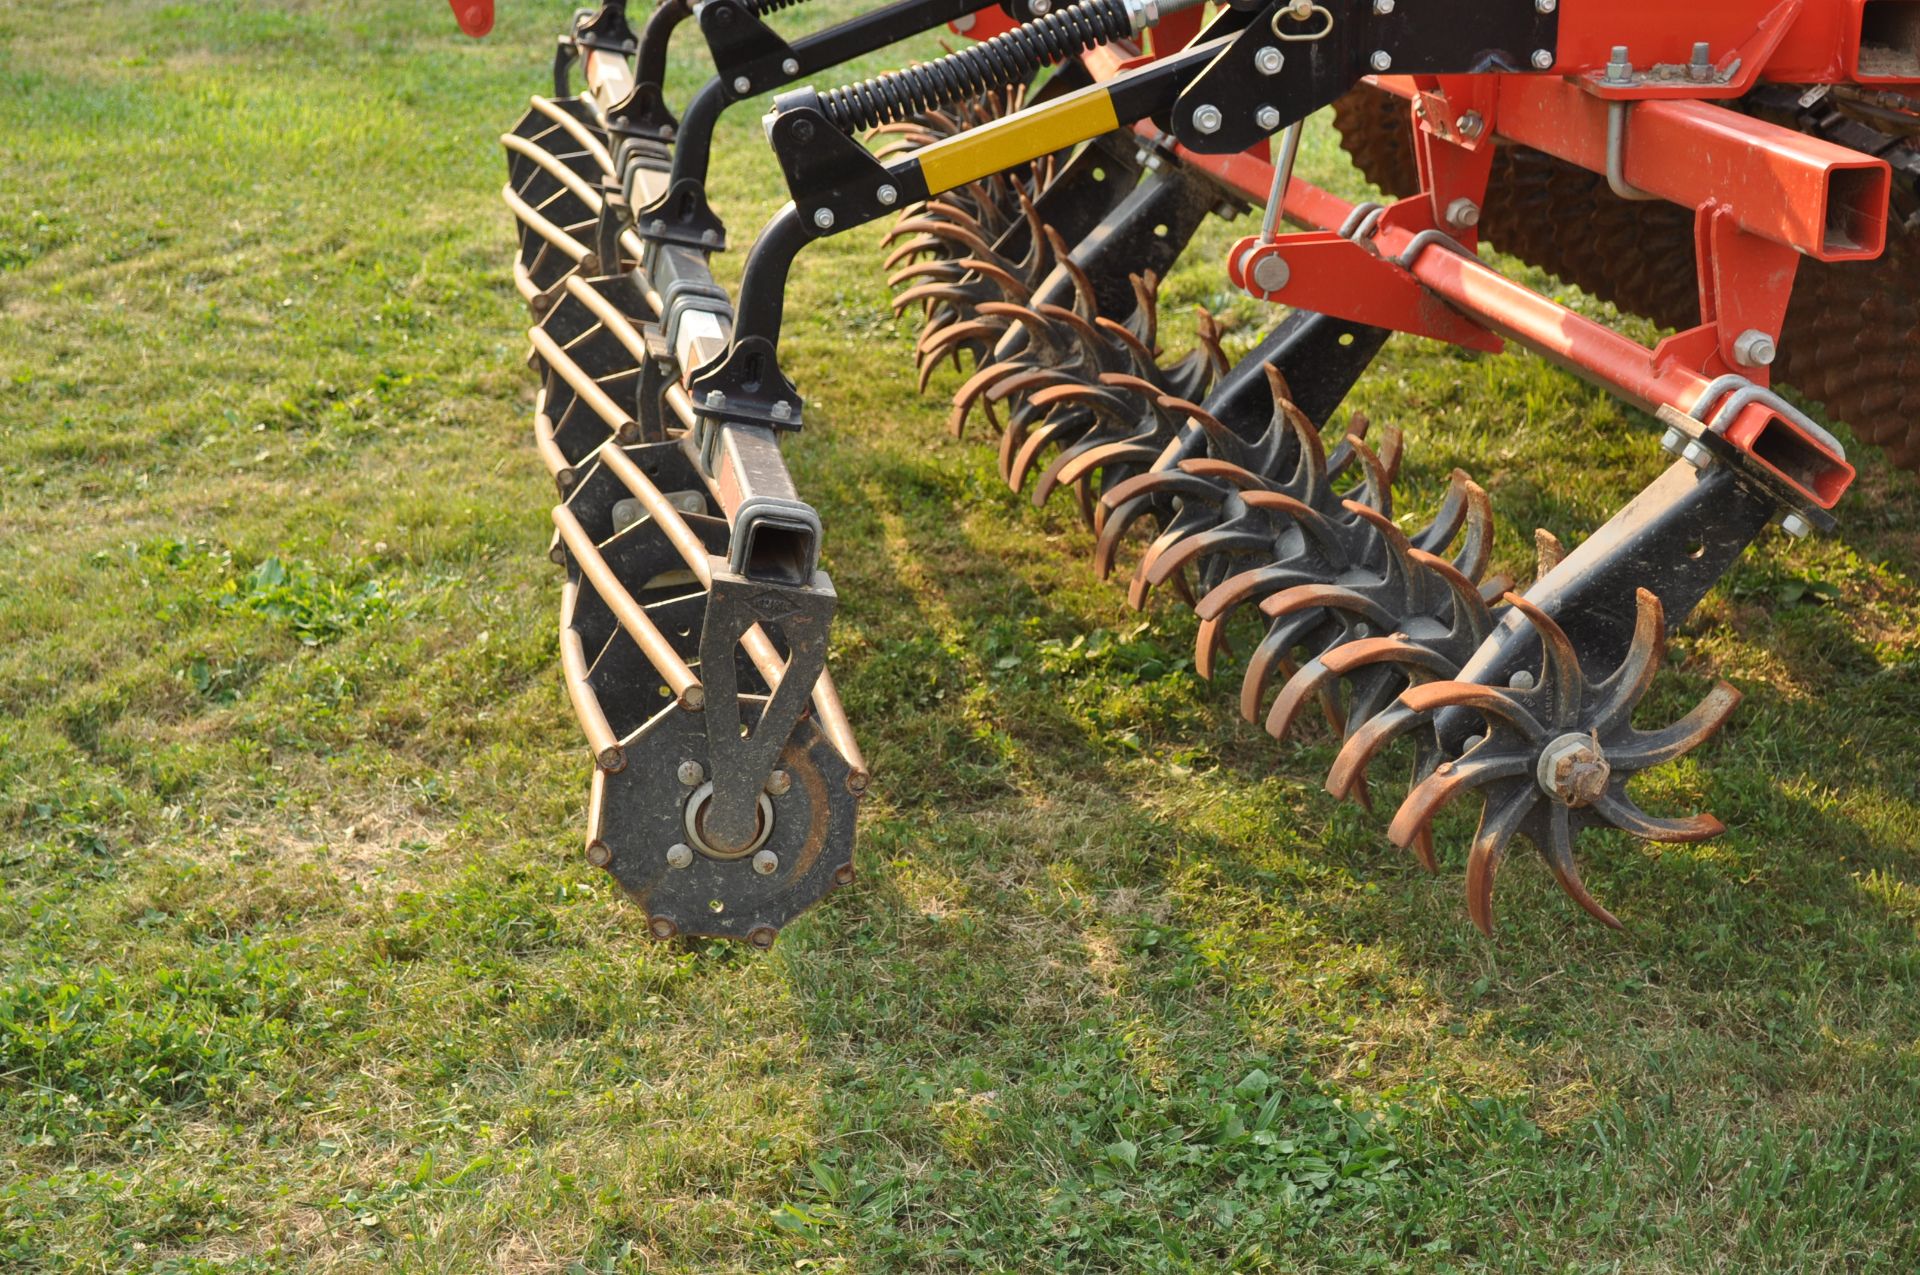 2018 30’ Kuhn Krause 8005 Excelerator vertical till, hyd fold, hyd angle, hyd down pressure spider - Image 18 of 25